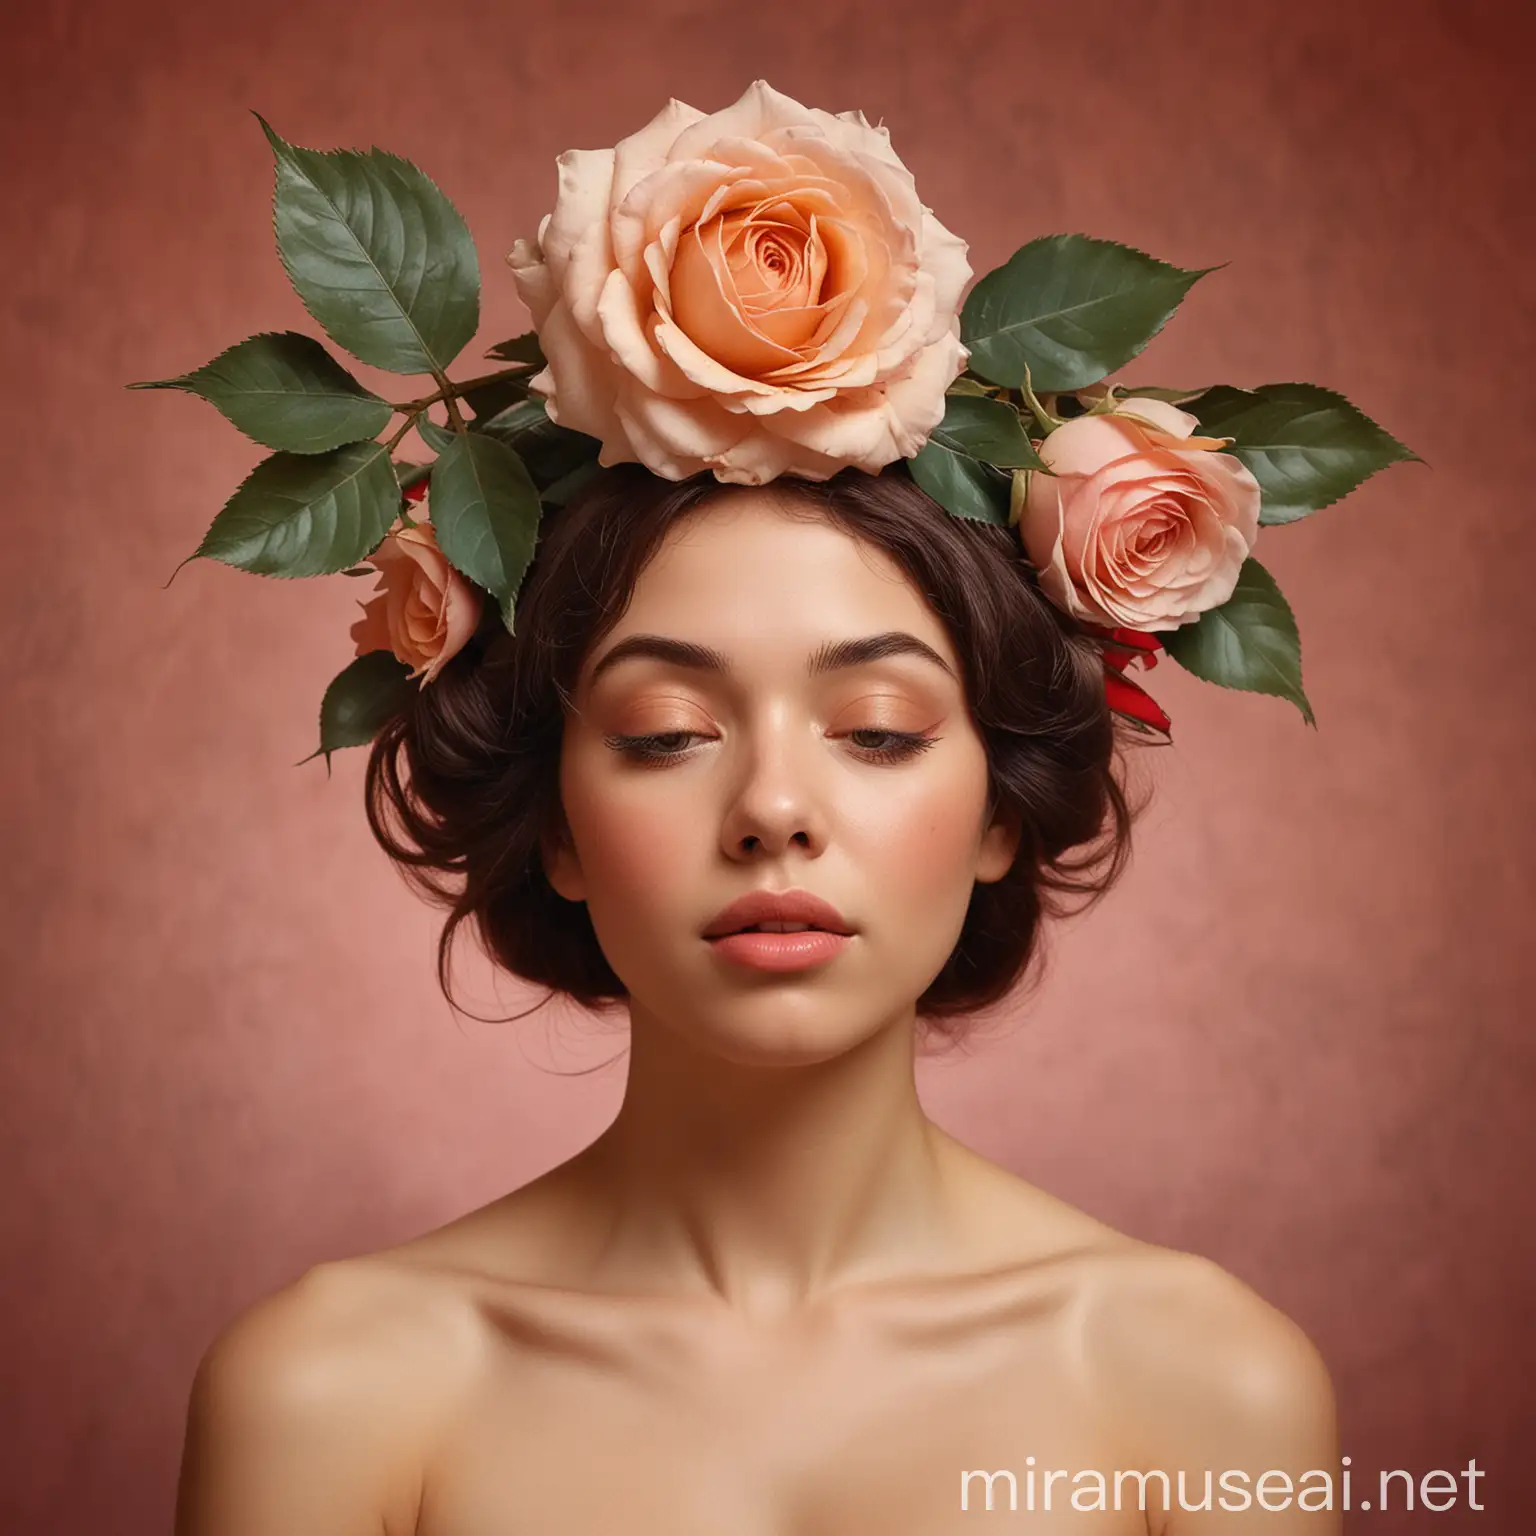 Liberated Woman with Blooming Rose Crown on ColdColored Background